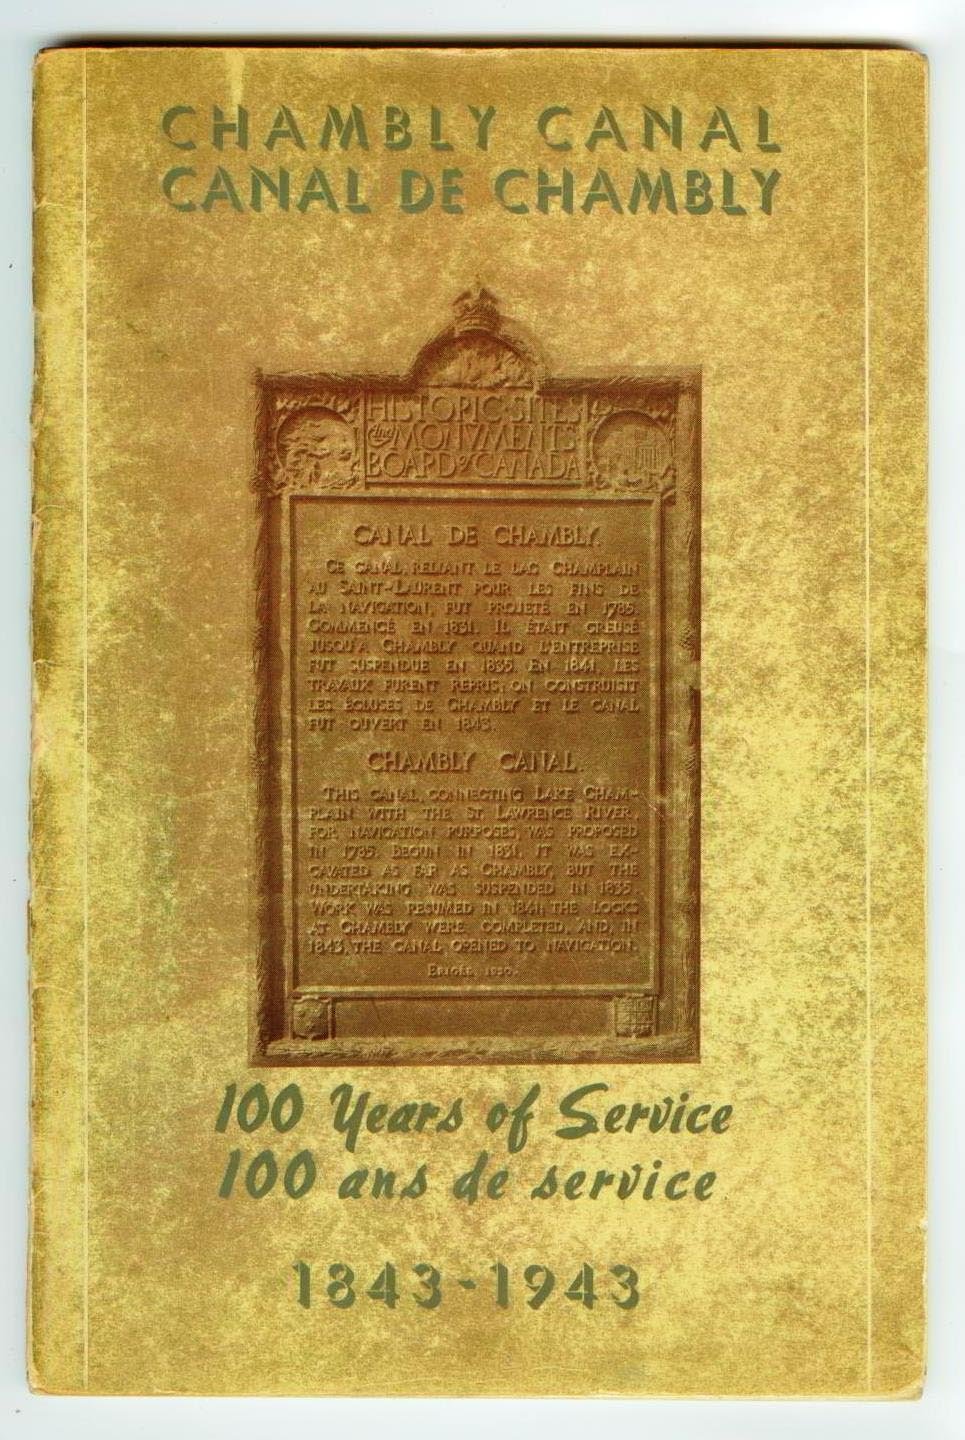 Chambly Canal/Canal de Chambly: 100 Years of Service/100 ans de service 1843-1943